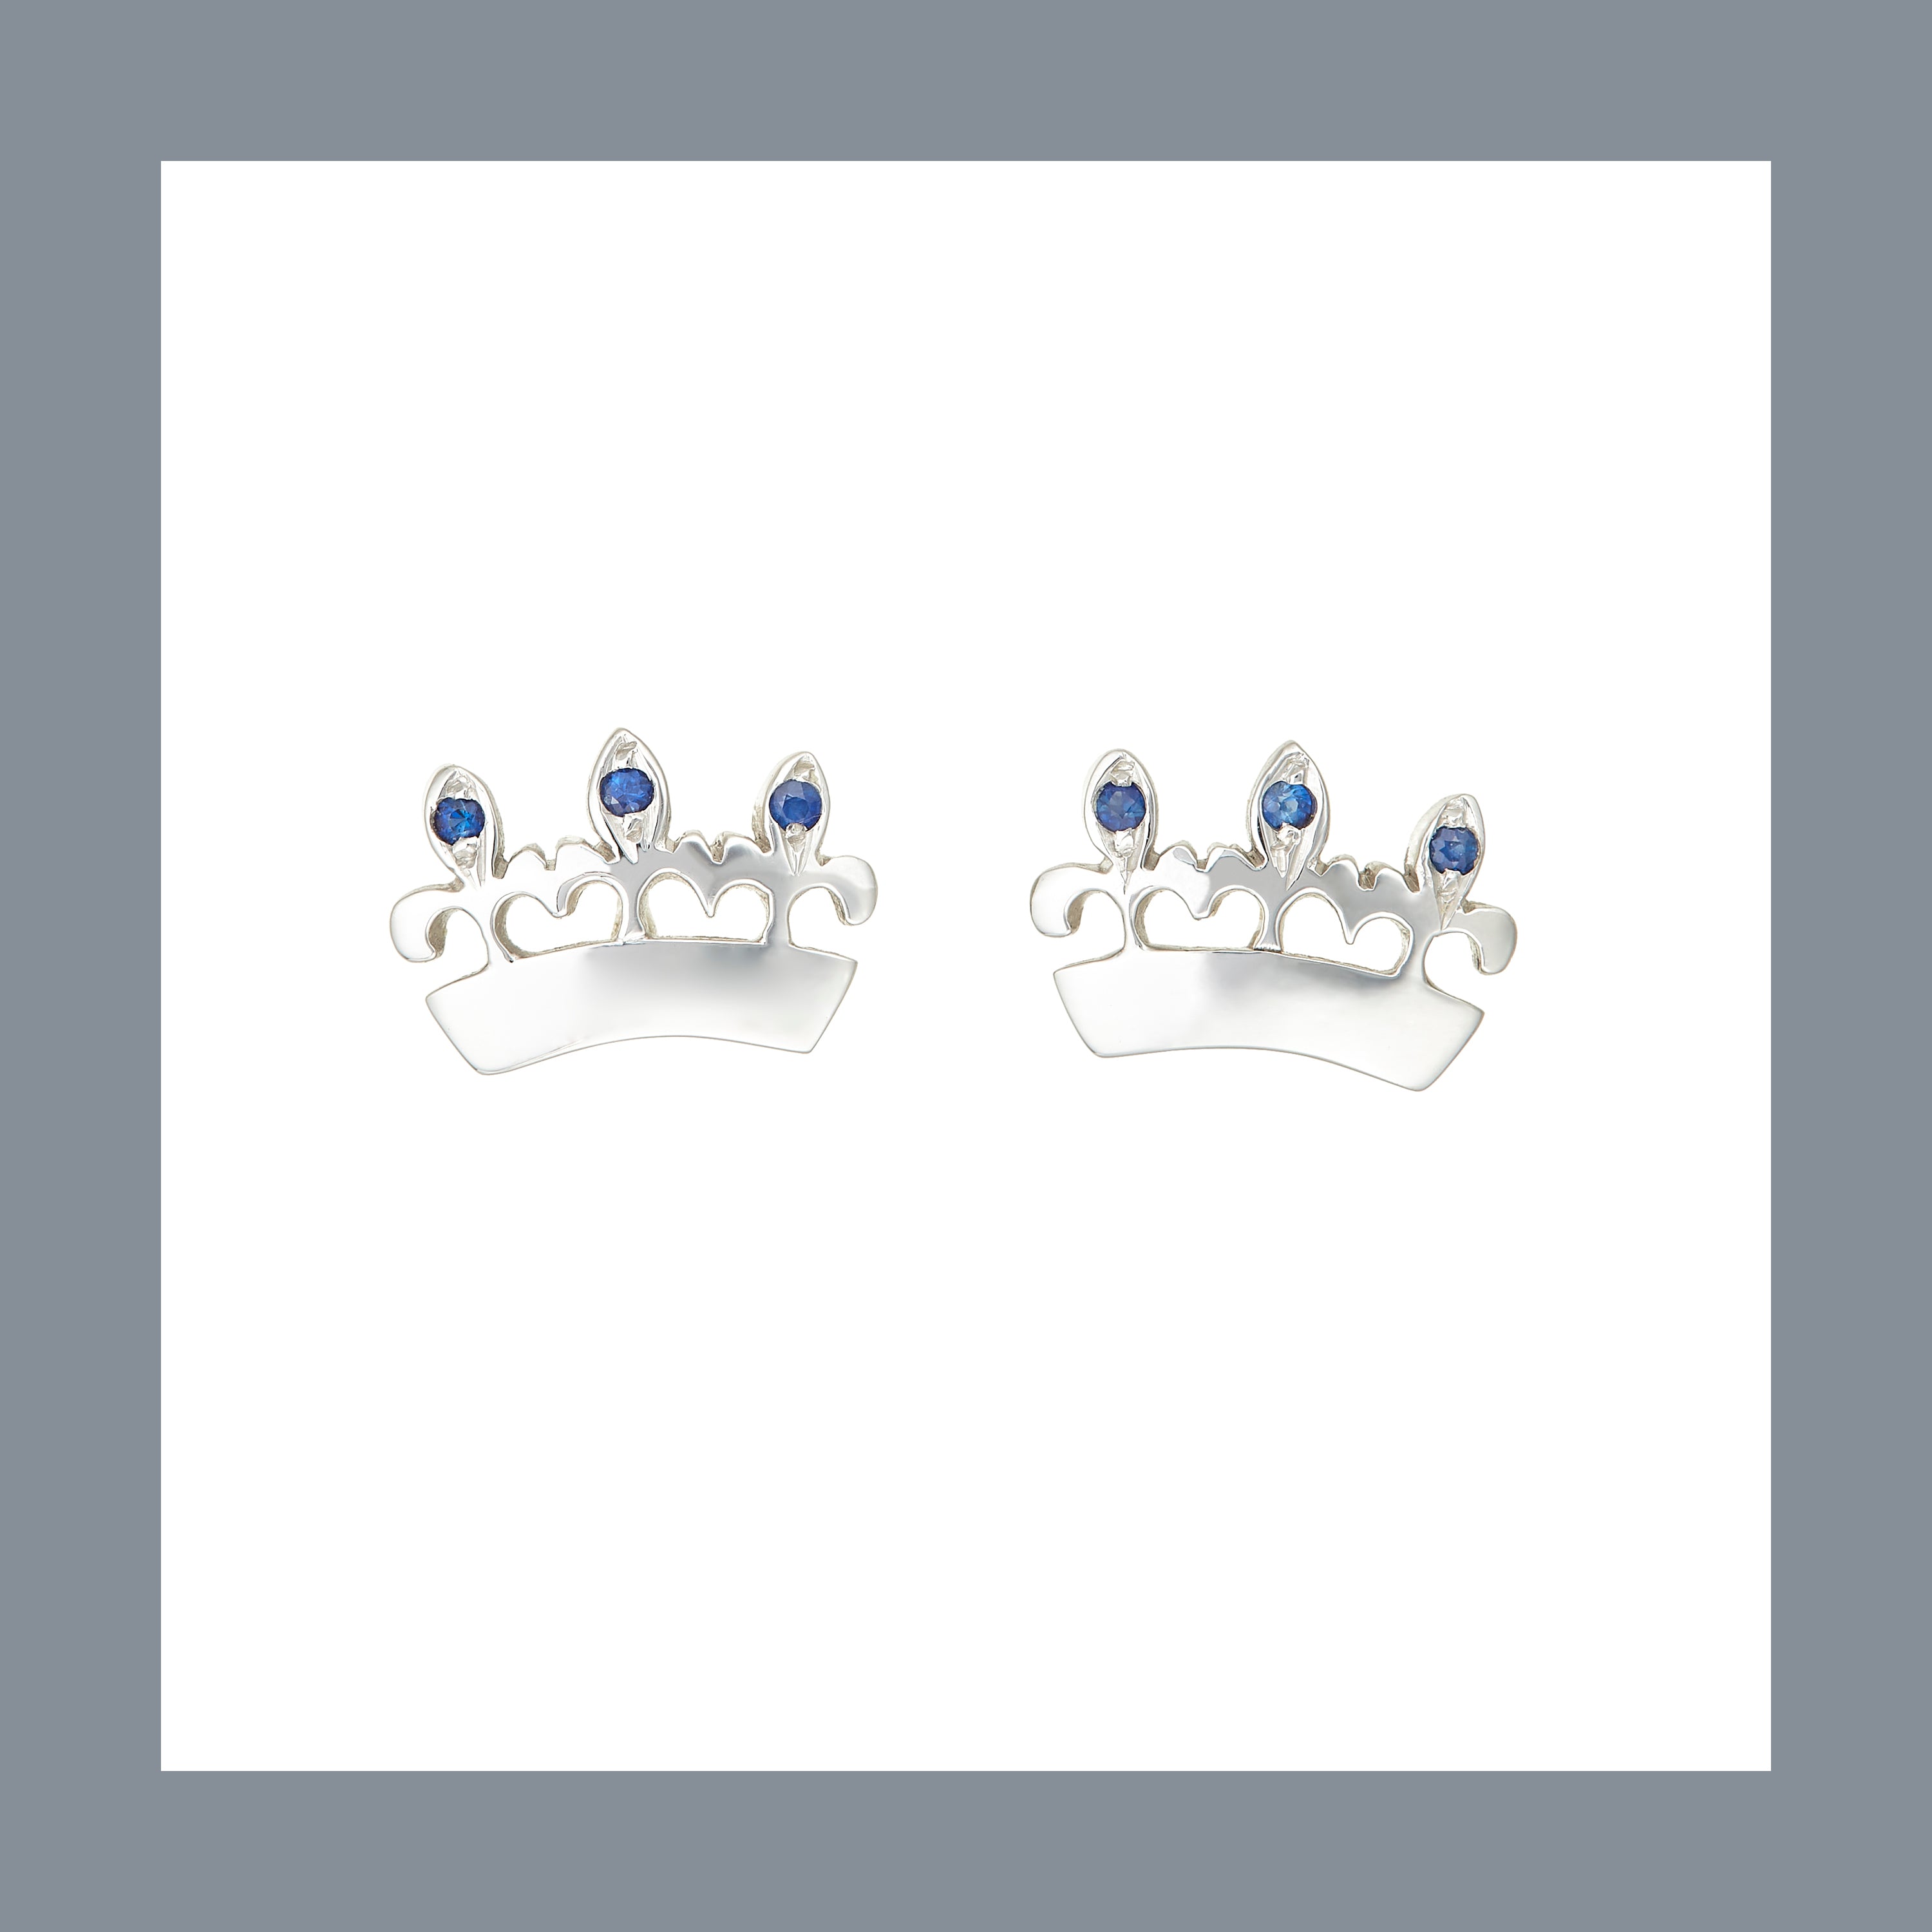 Bee Queen Crown Earrings with sapphires